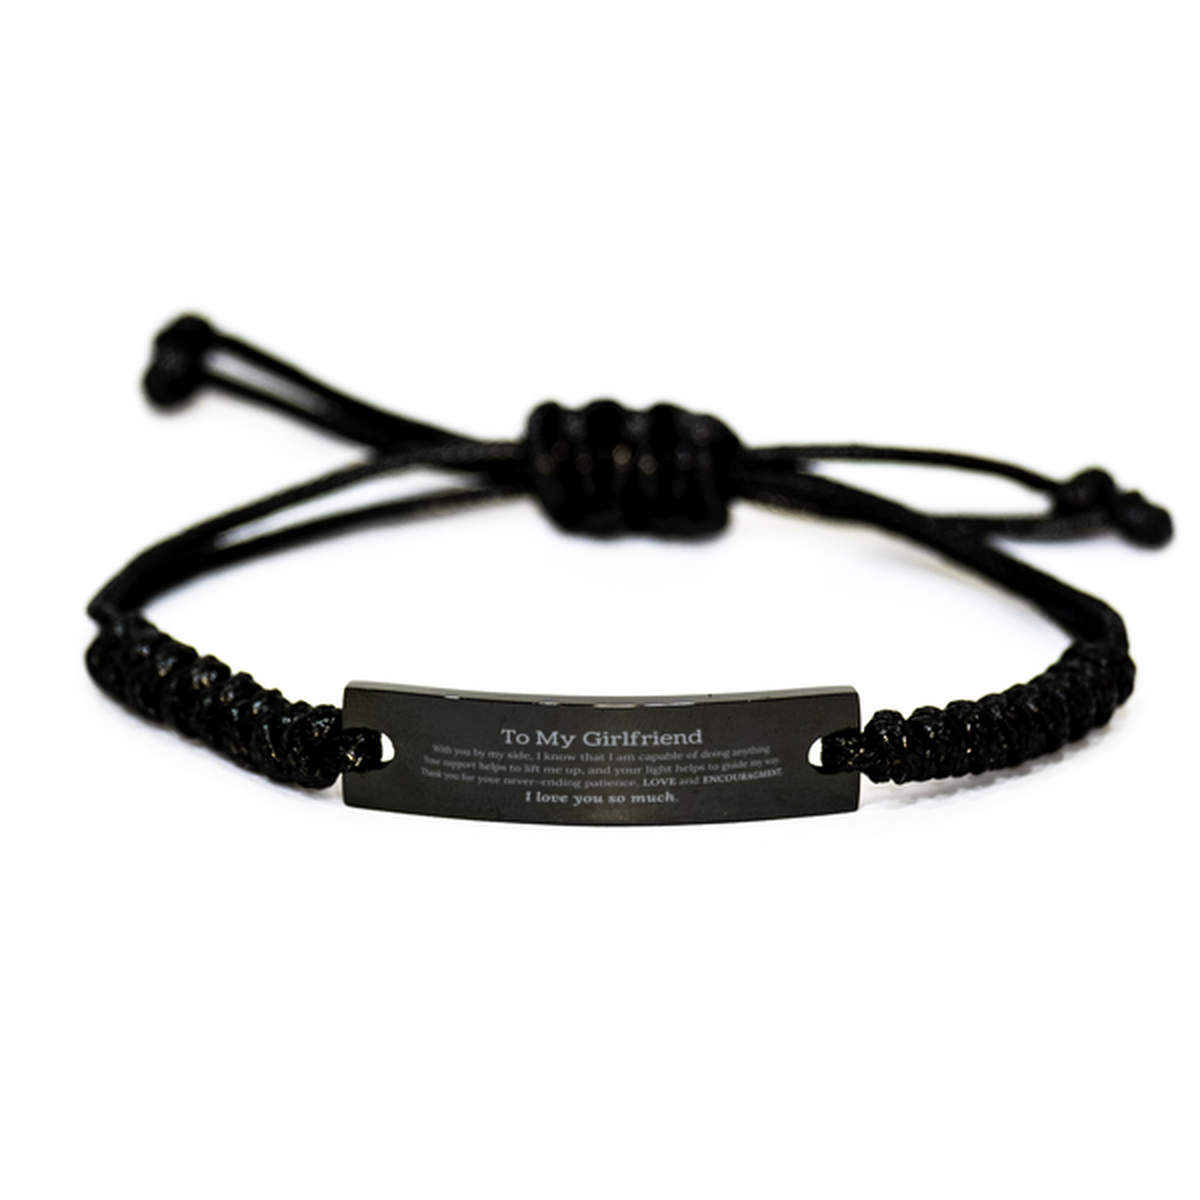 Appreciation Girlfriend Black Rope Bracelet Gifts, To My Girlfriend Birthday Christmas Wedding Keepsake Gifts for Girlfriend With you by my side, I know that I am capable of doing anything. I love you so much